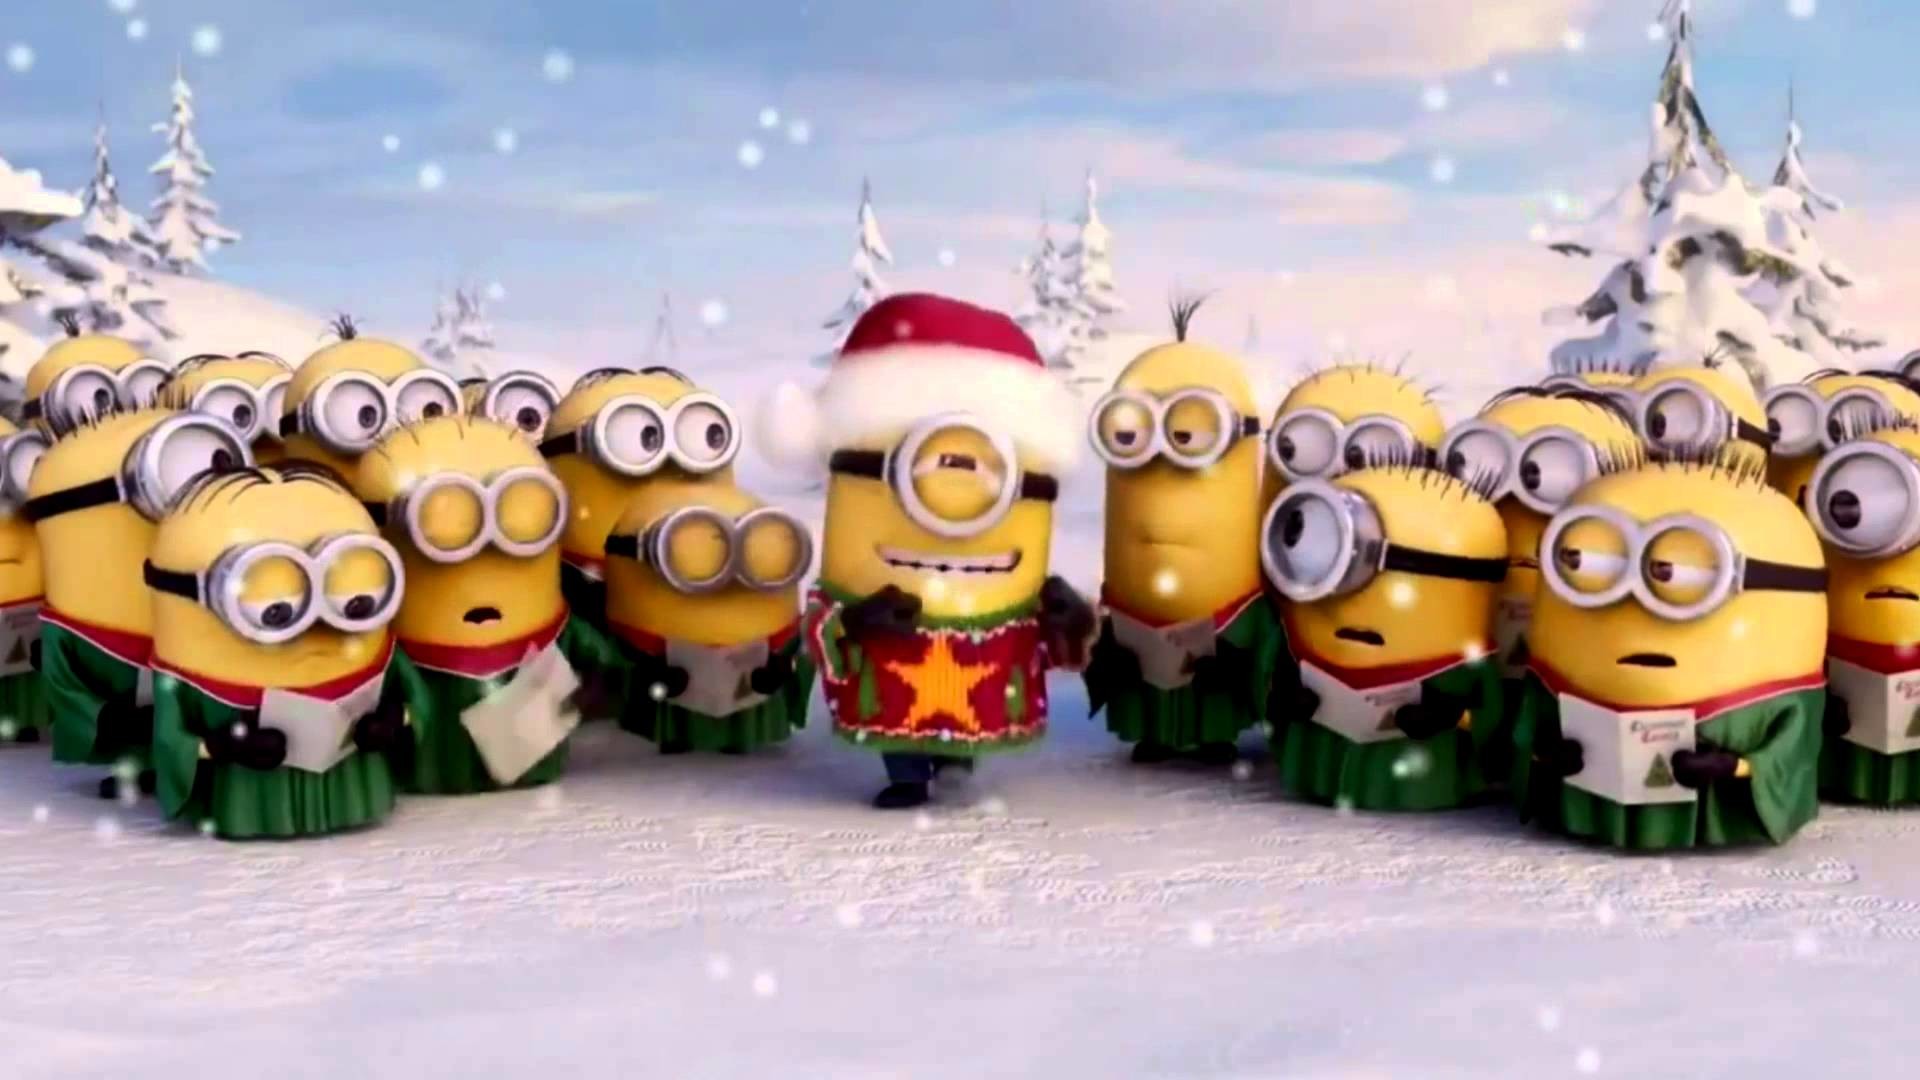 Cute Christmas wallpapers minions Christmas with minions in Suriname – YouTube